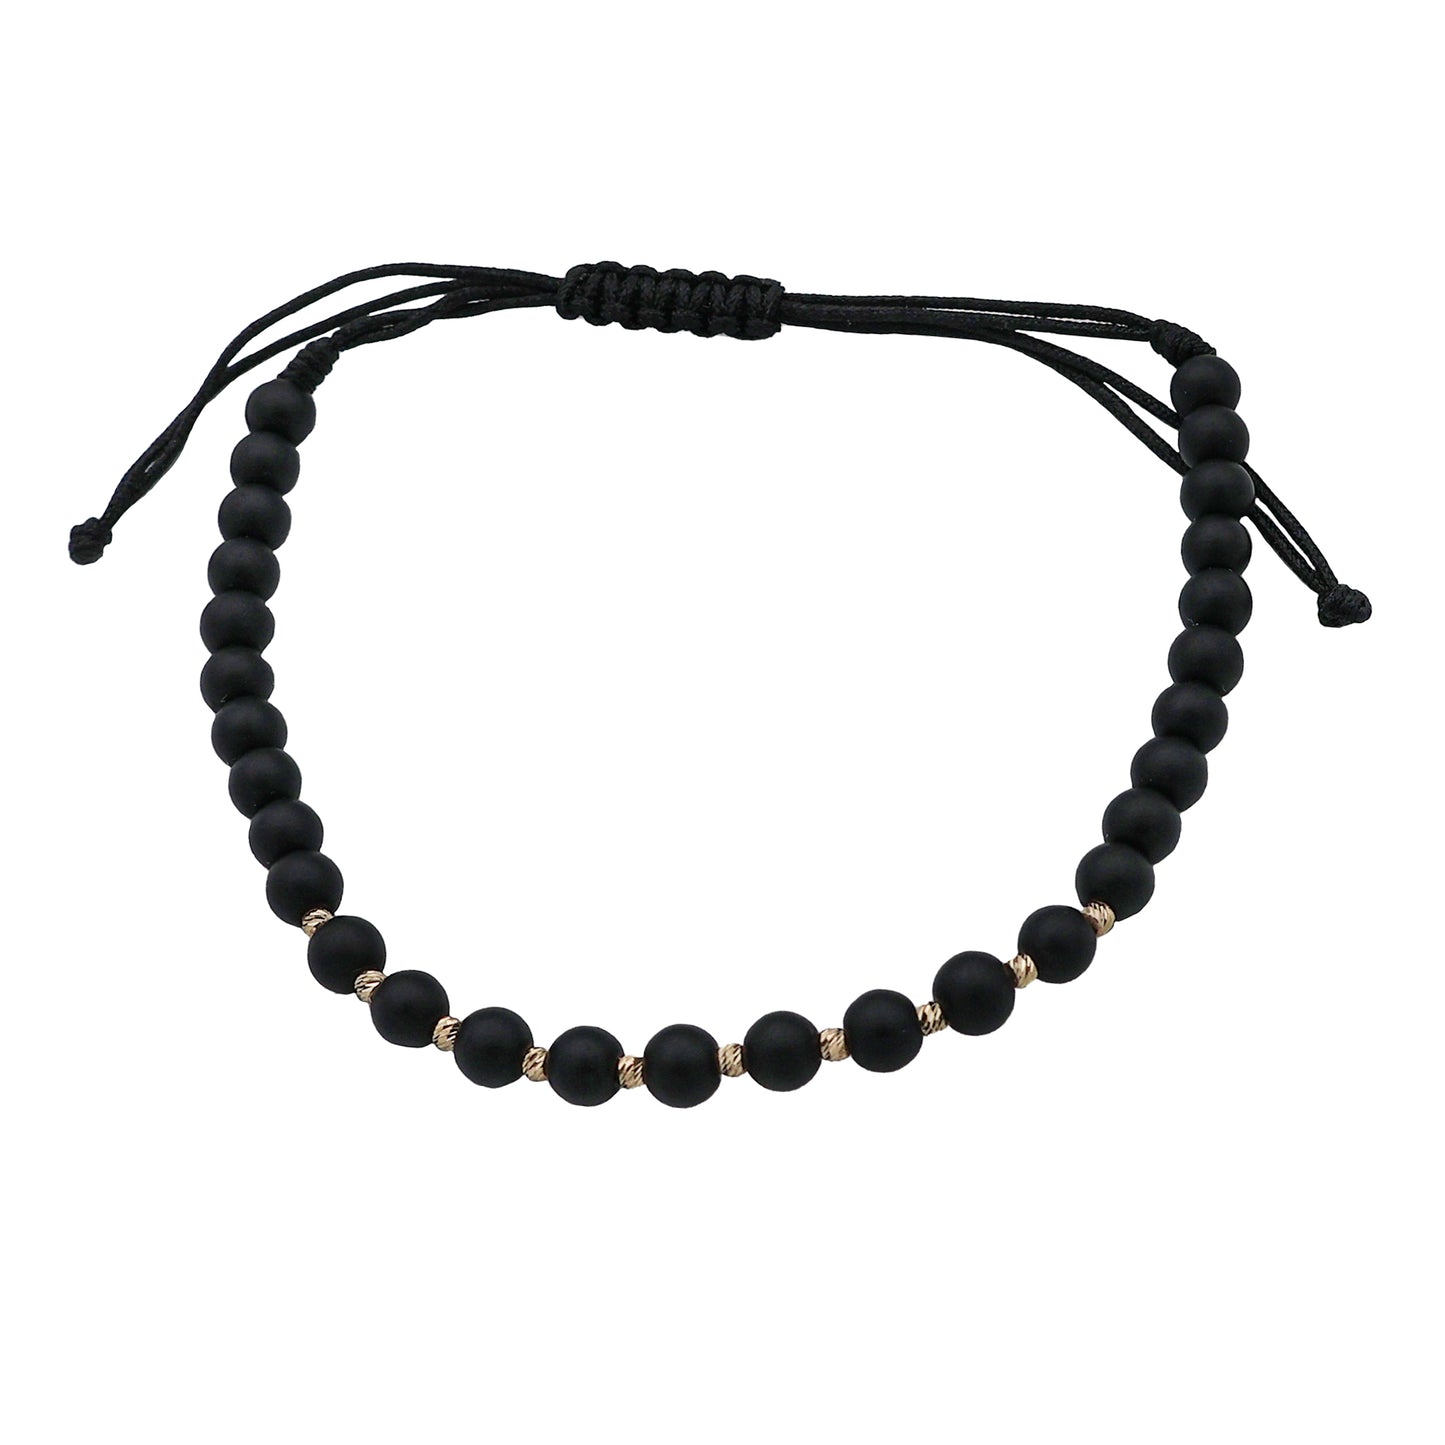 Bracelet with matte black onyx semi-precious stones and 10 beads of 14K solid gold Vega Lopez